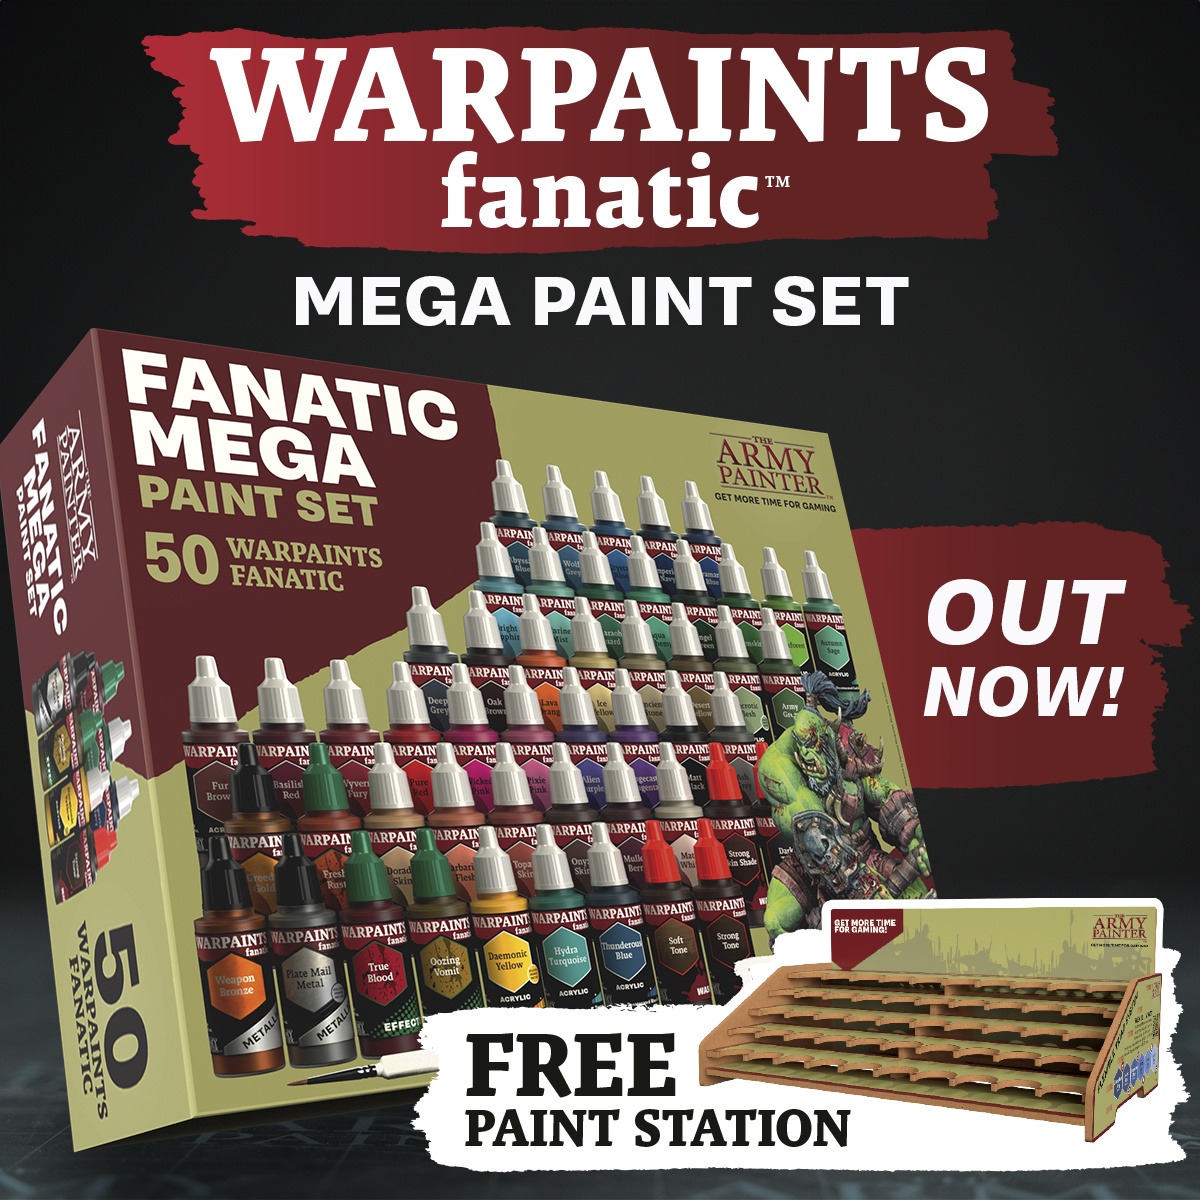 The highly anticipated Warpaints Fanatic Mega Paint Set is in-stores now! The Mega Paint Set features 50 carefully selected paints at an AMAZING price – making this the best value in hobby paints! Visit your FLGS or order here 👉 thearmypainter.pulse.ly/aqn6txbqeo #warpaintsfanatic